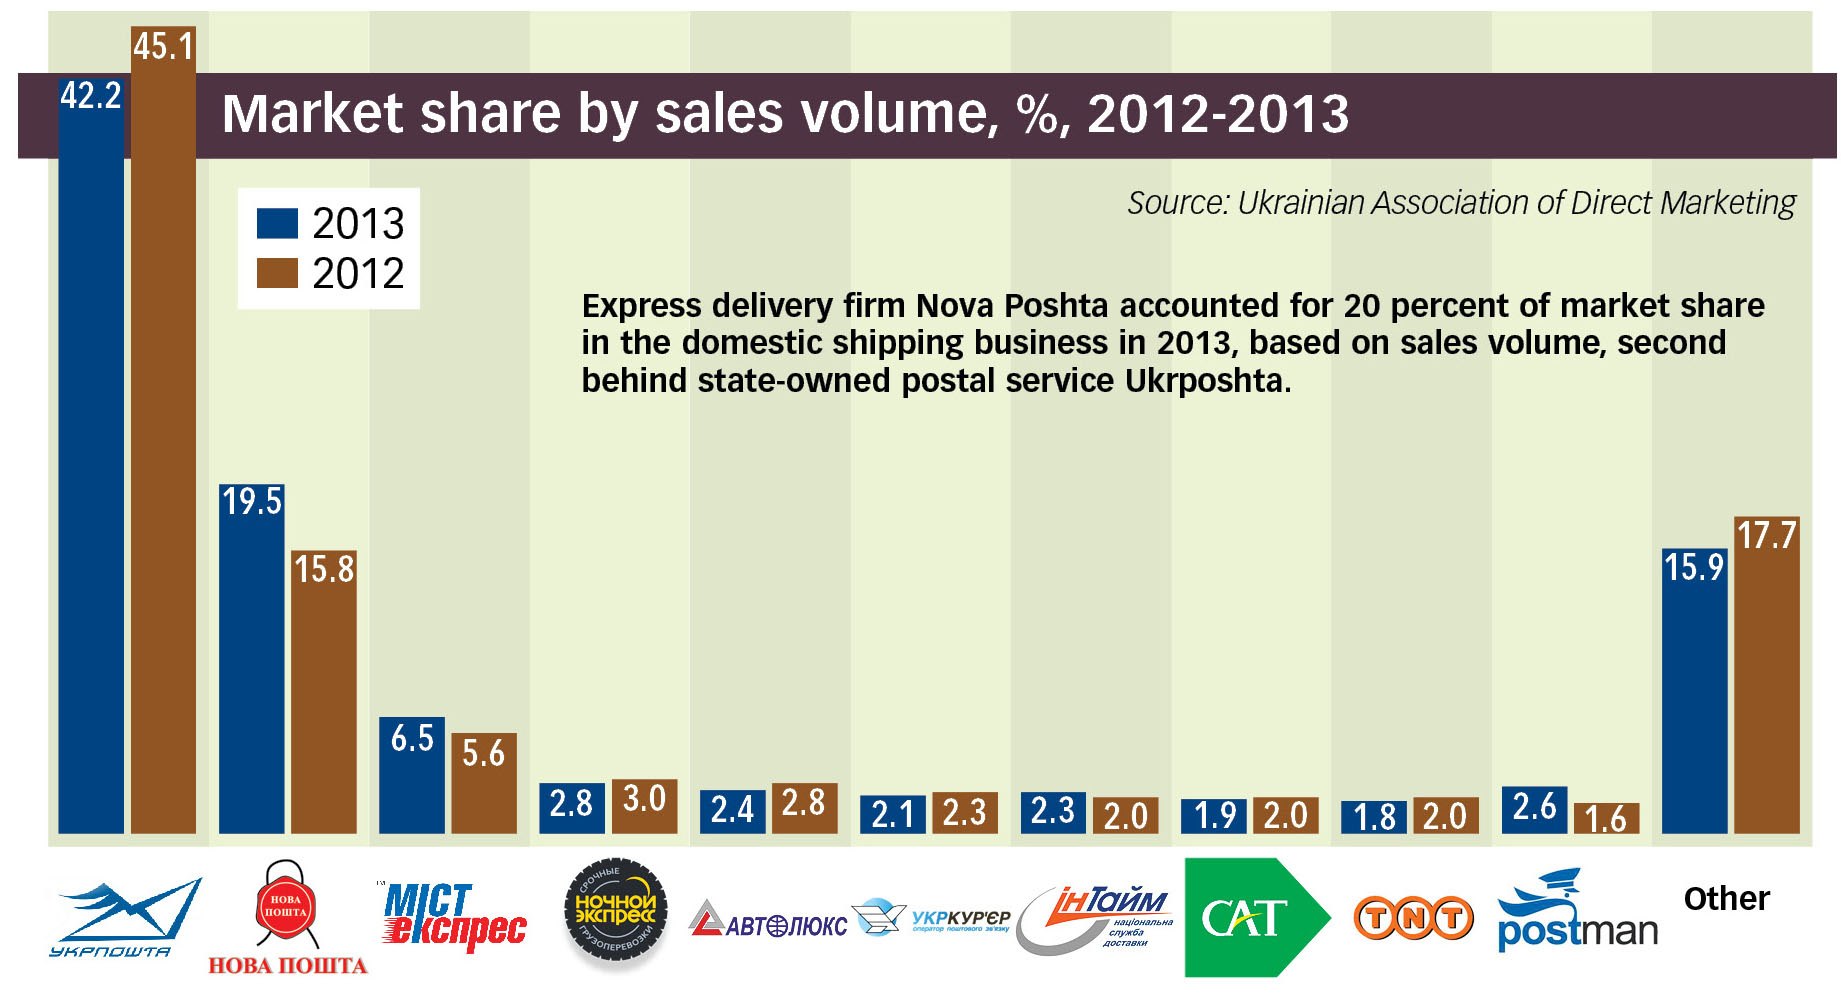 Market share by sales volume